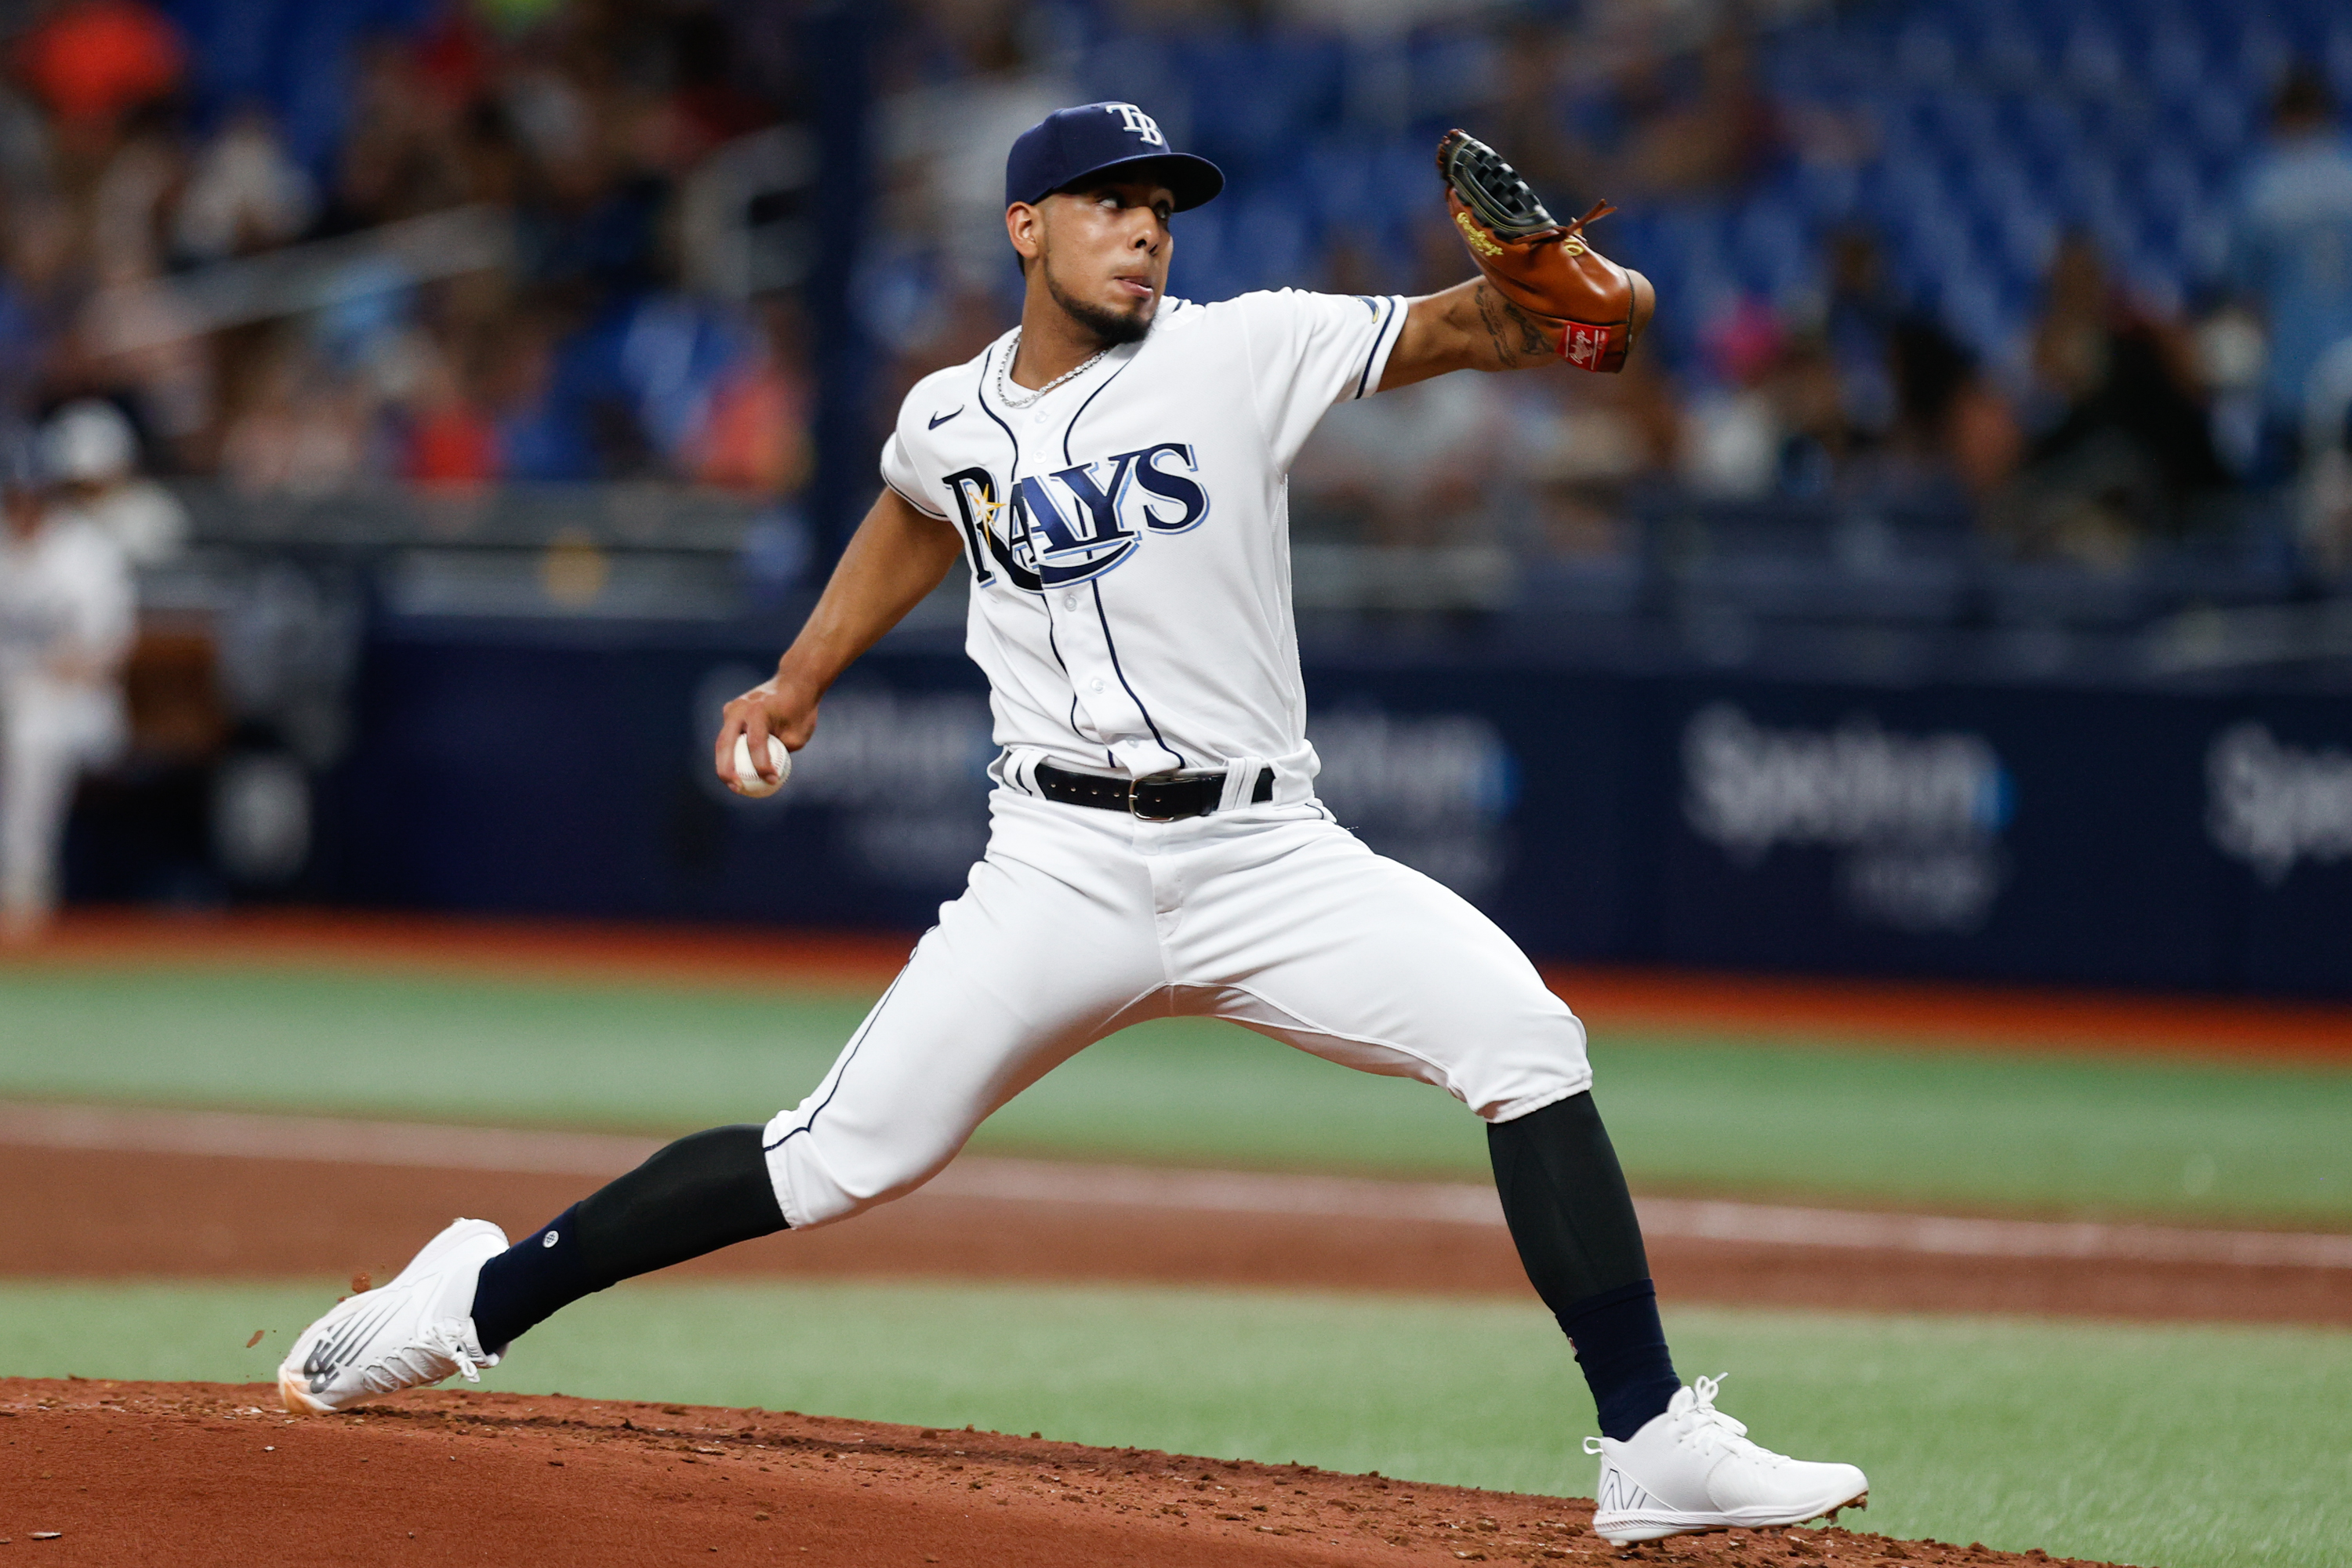 Luis Patiño strong in return, Rays beat Royals 7-1